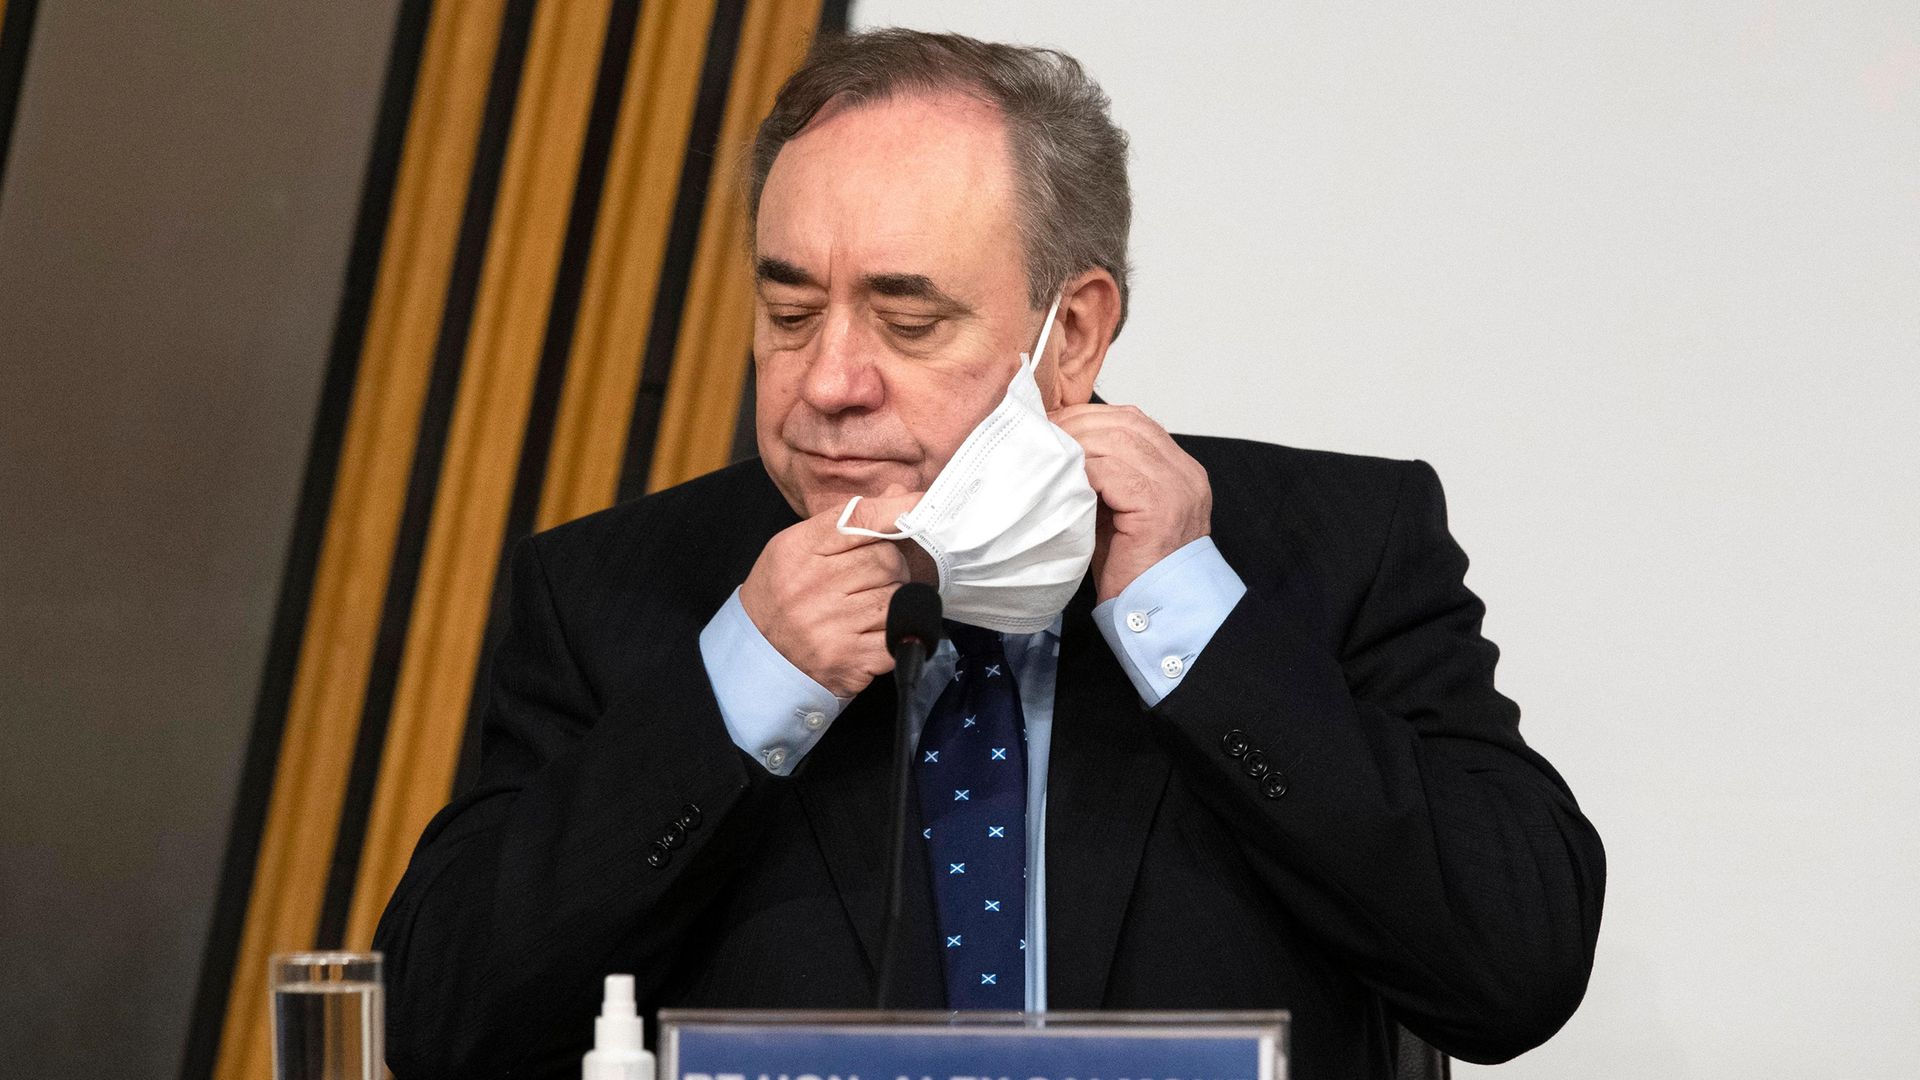 Alex Salmond attends The Committee on the Scottish Government Handling of Harassment Complaints at Holyrood - Credit: Getty Images